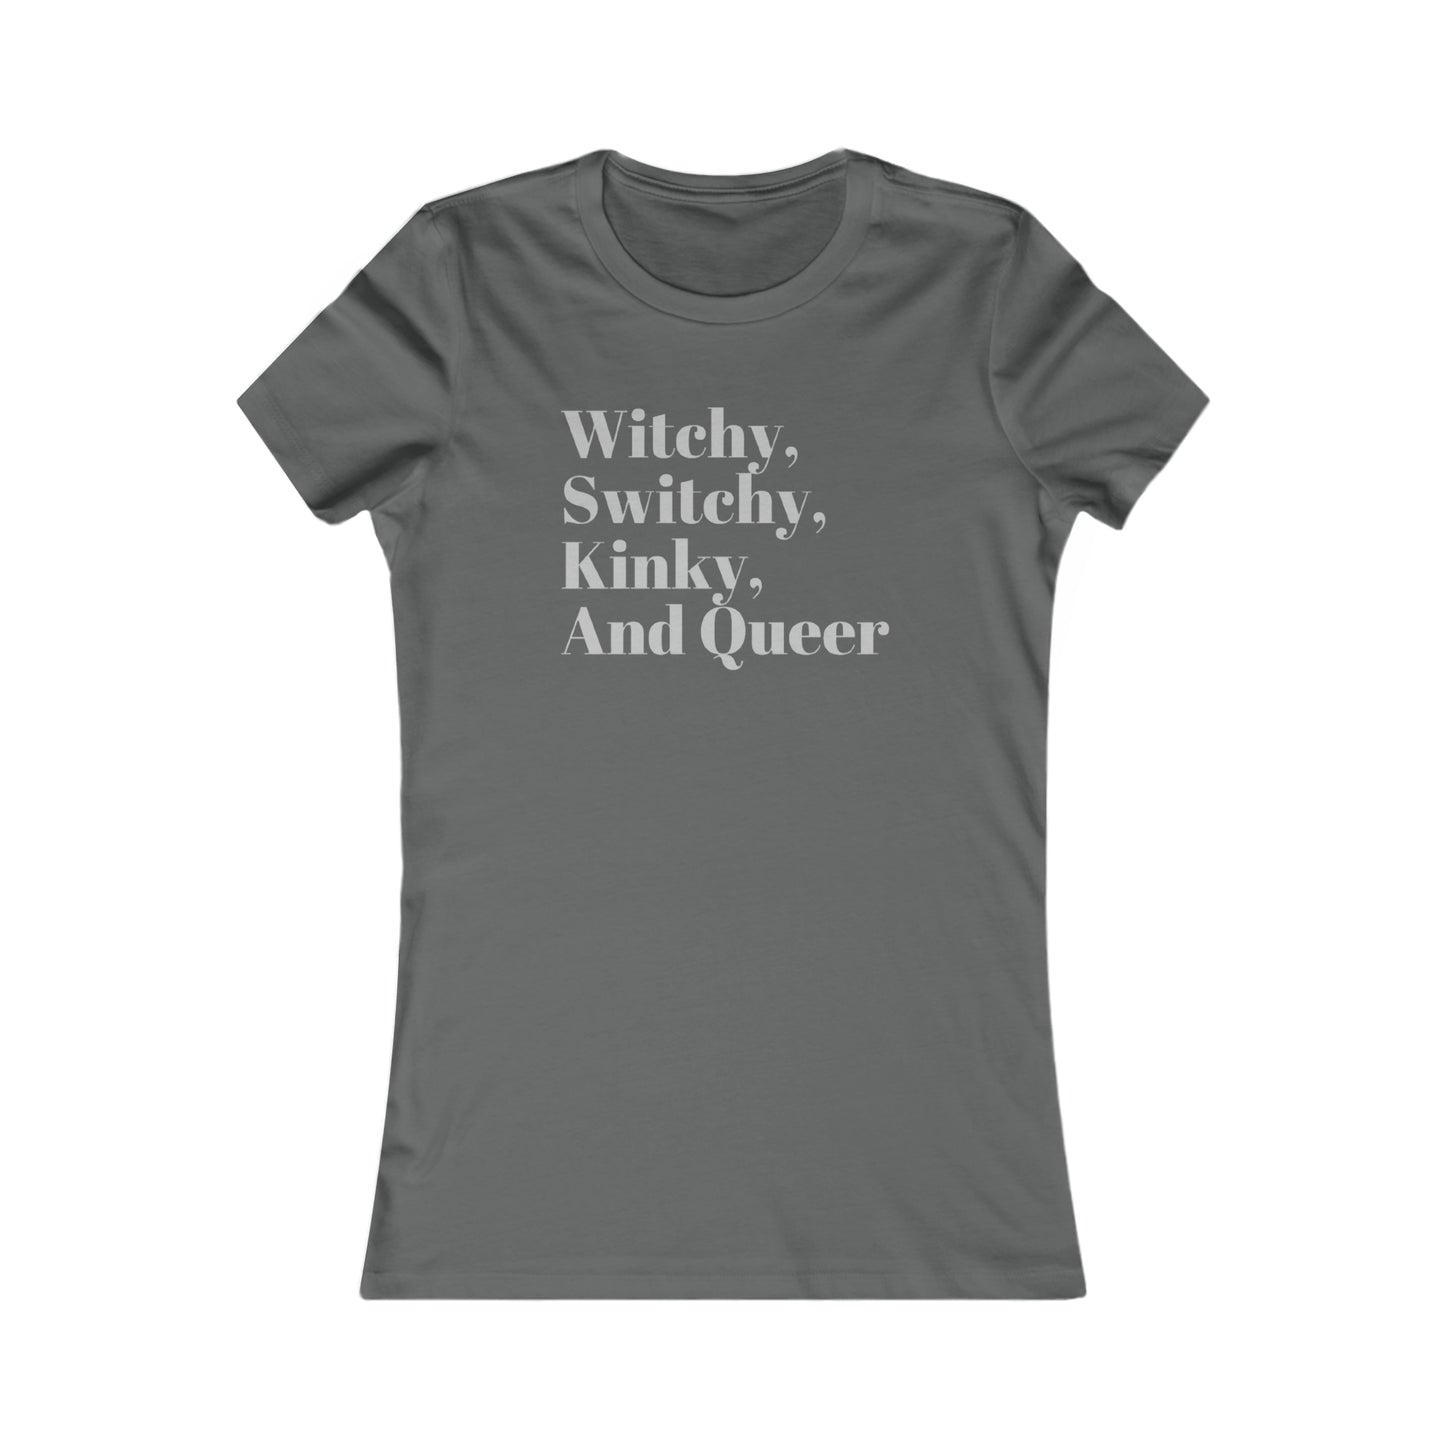 Witchy, Switchy, Kinky, and Queer Favorite Tee